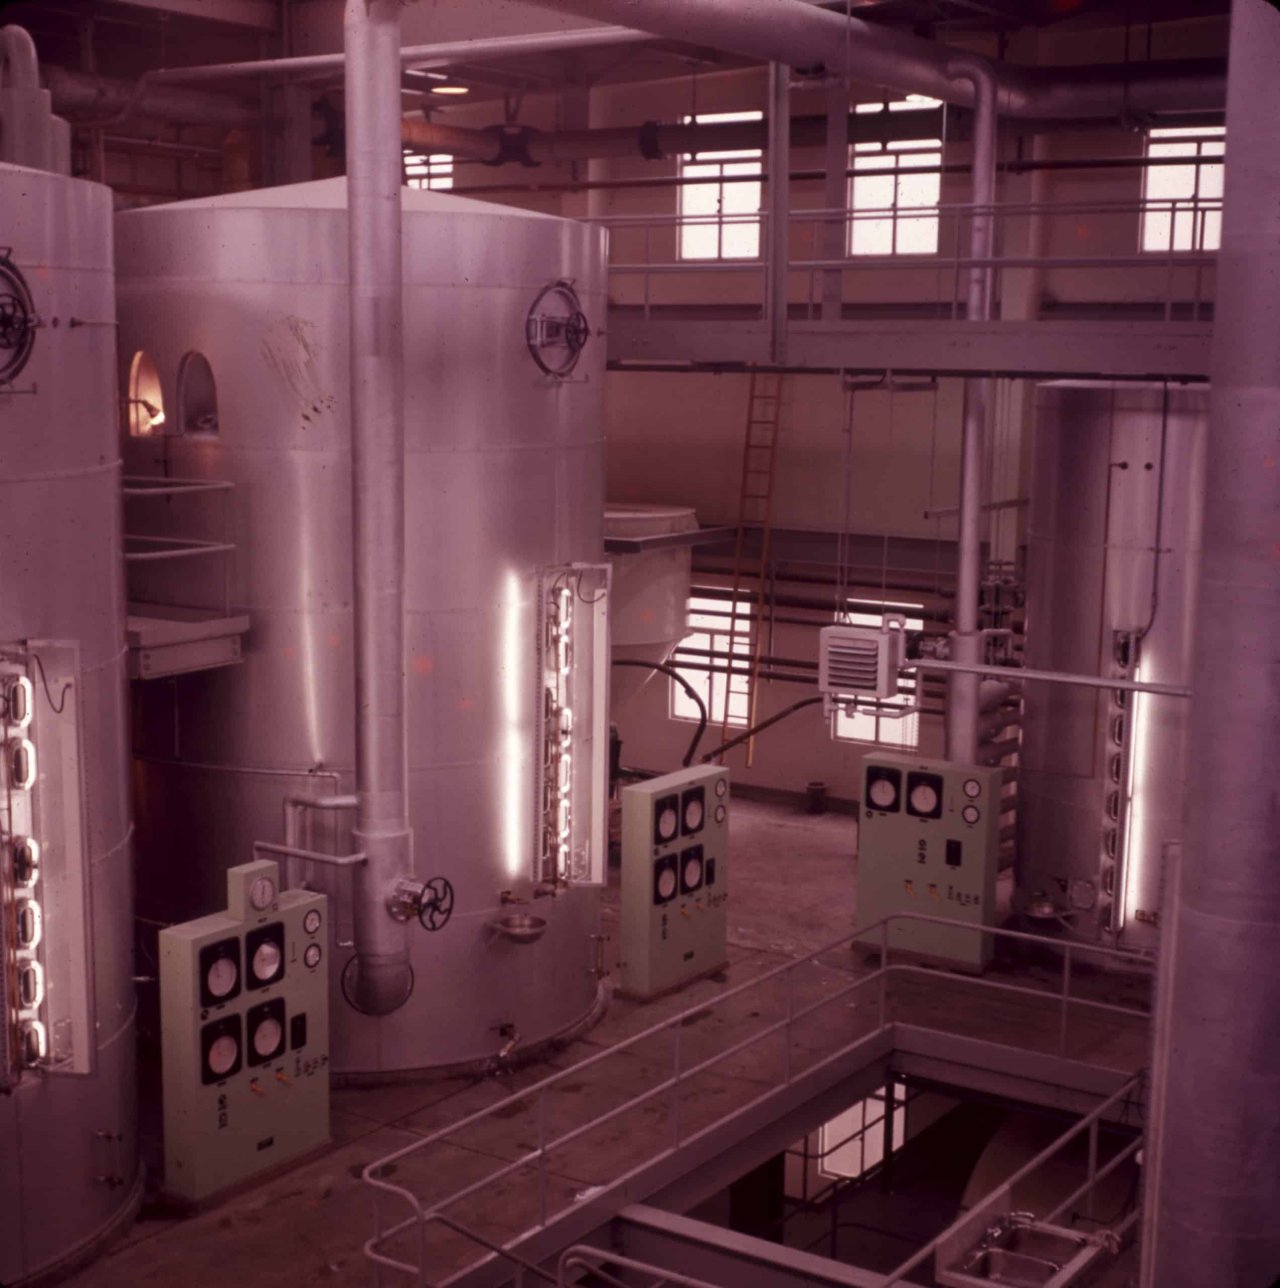 Inside the B.C. Sugar refinery in the 1970s. City of Vancouver Archives, c82011-092.0152.